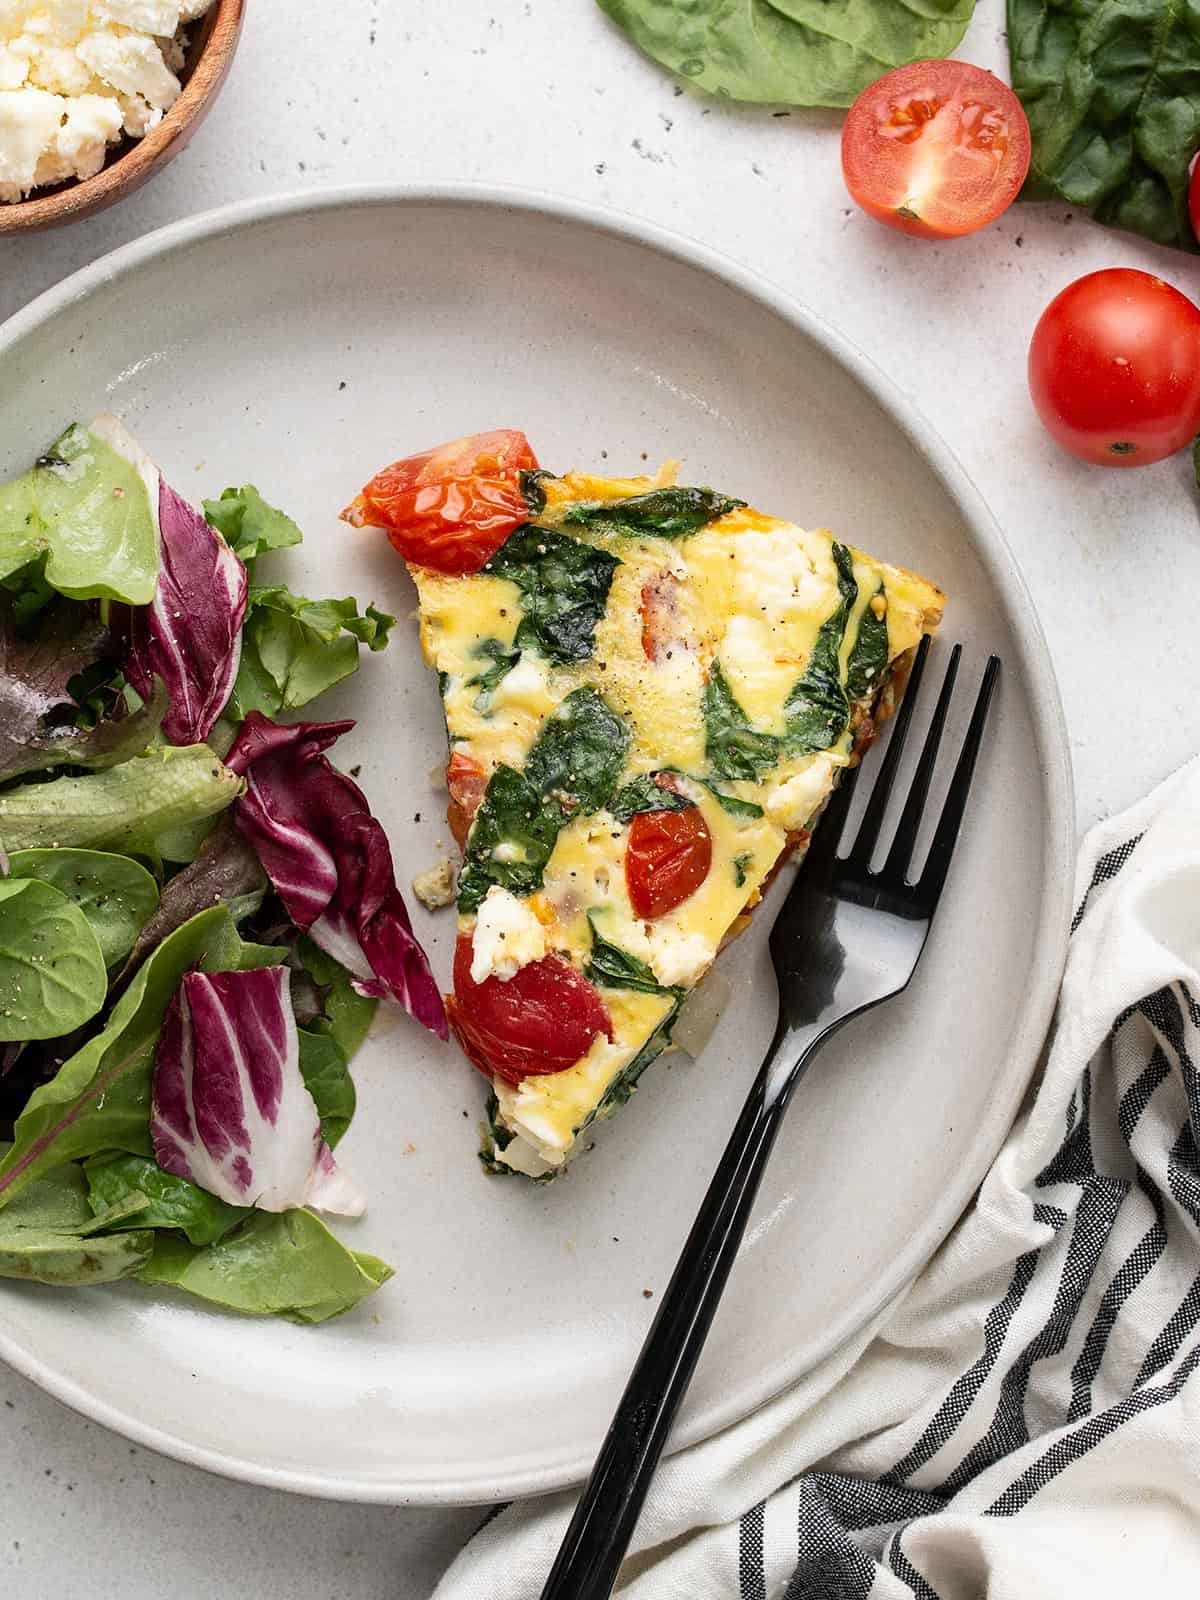 A slice of frittata on a plate with a simple side salad.